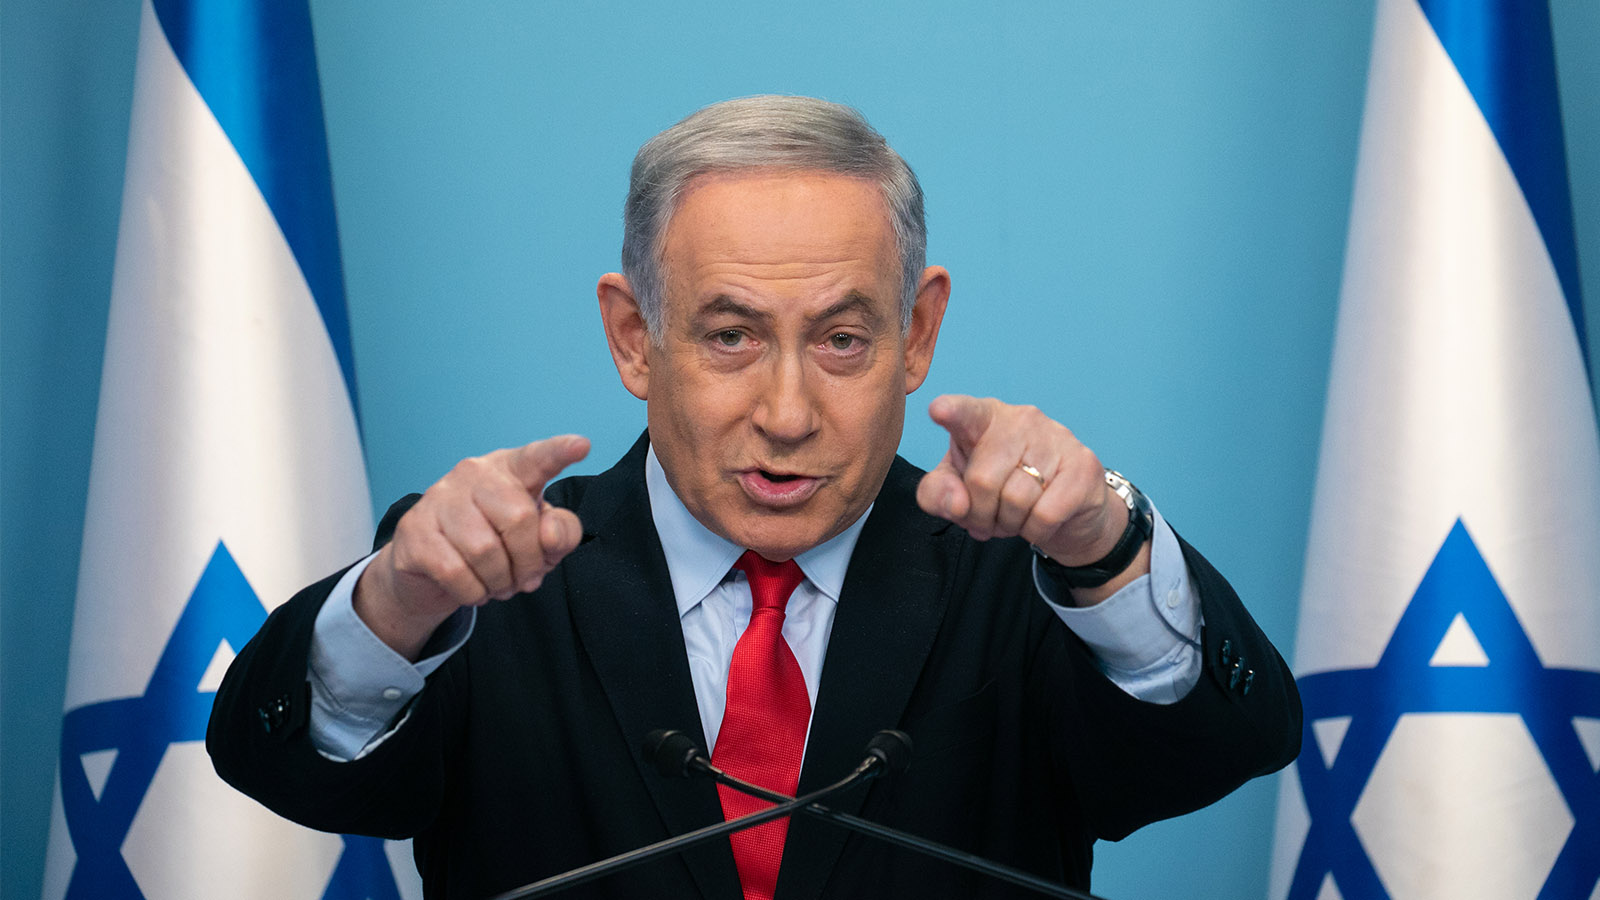 Israeli prime minister Benjamin Netanyahu holding a press conference at the Prime Ministers office in Jerusalem, Mar. 12, 2020. (Photograph: Olivier Fitoussi/Flash90)